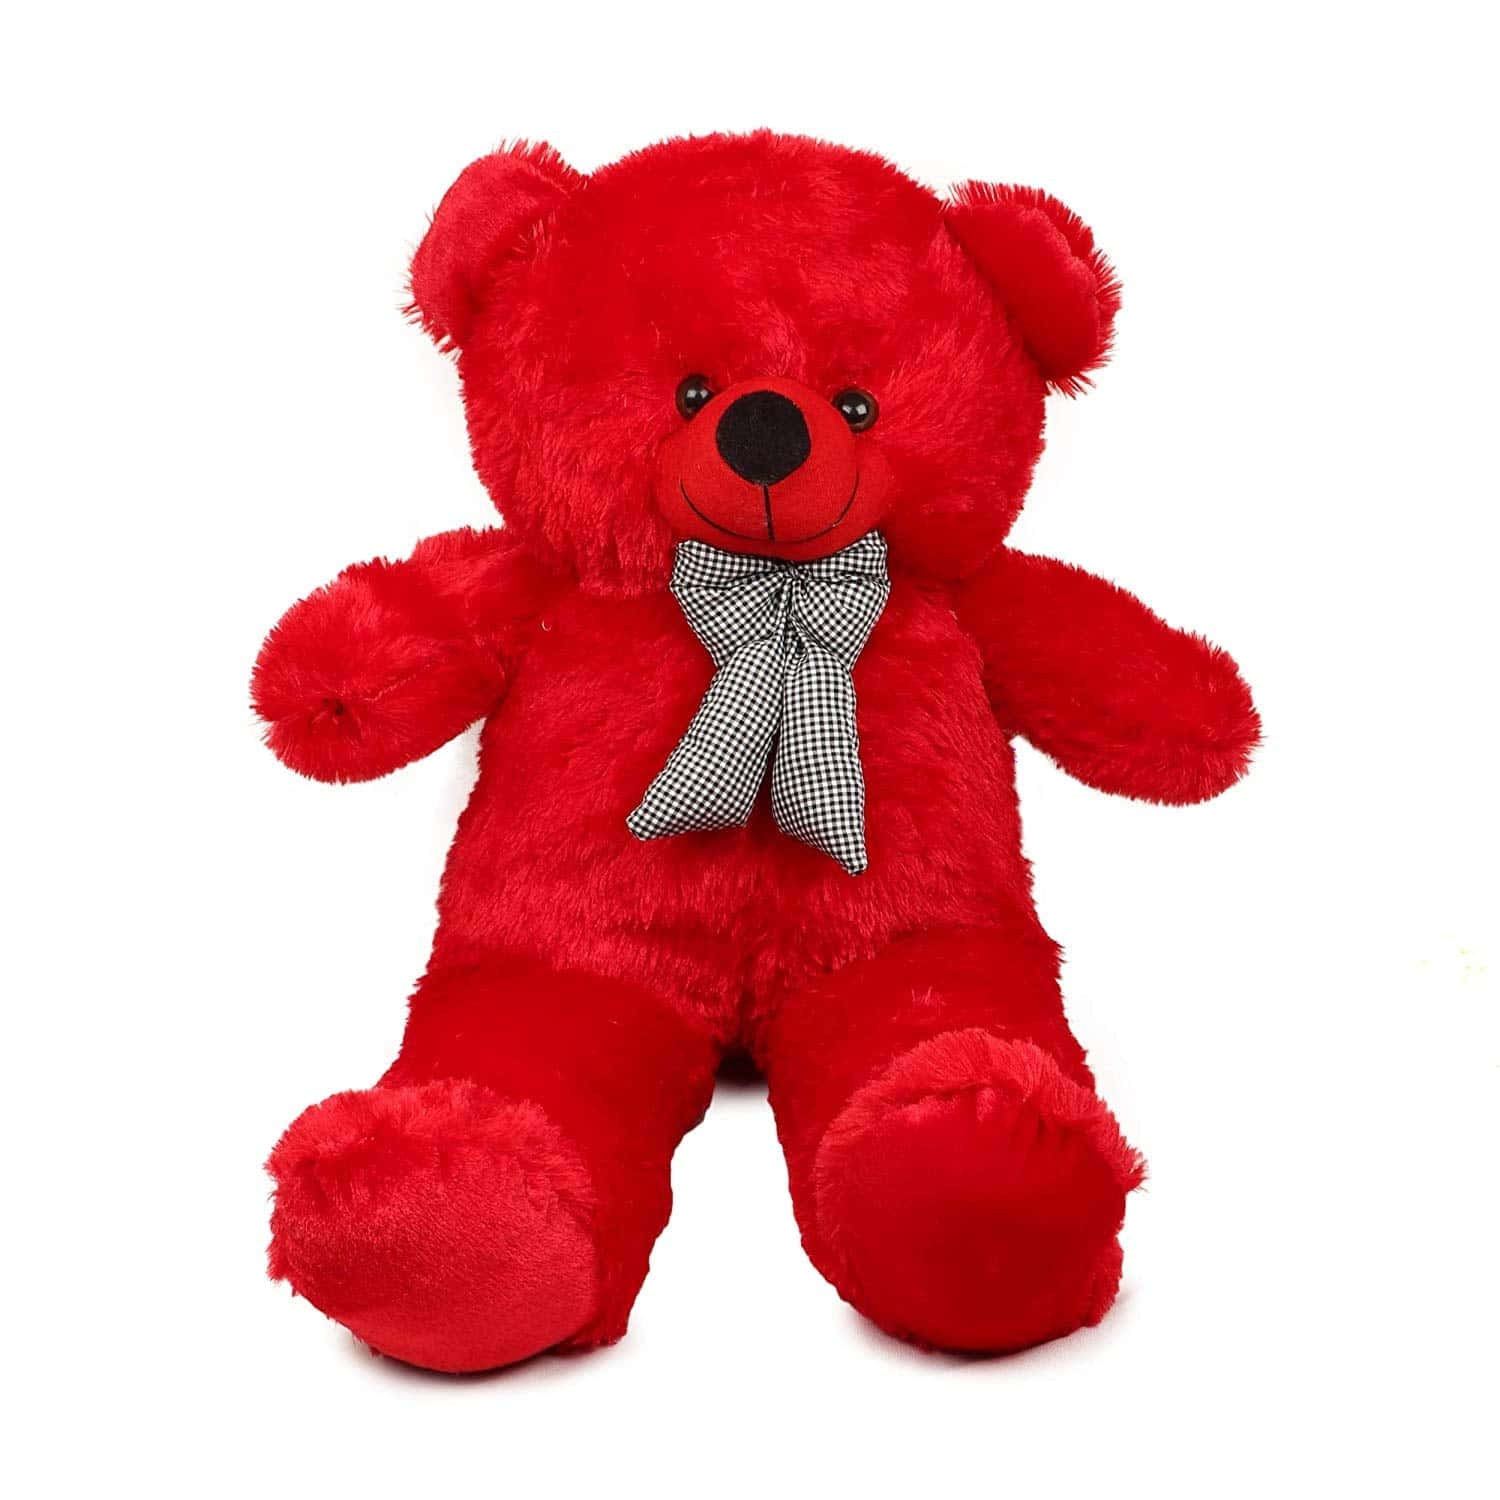 A Red Teddy Bear With A Grey Bow Tie